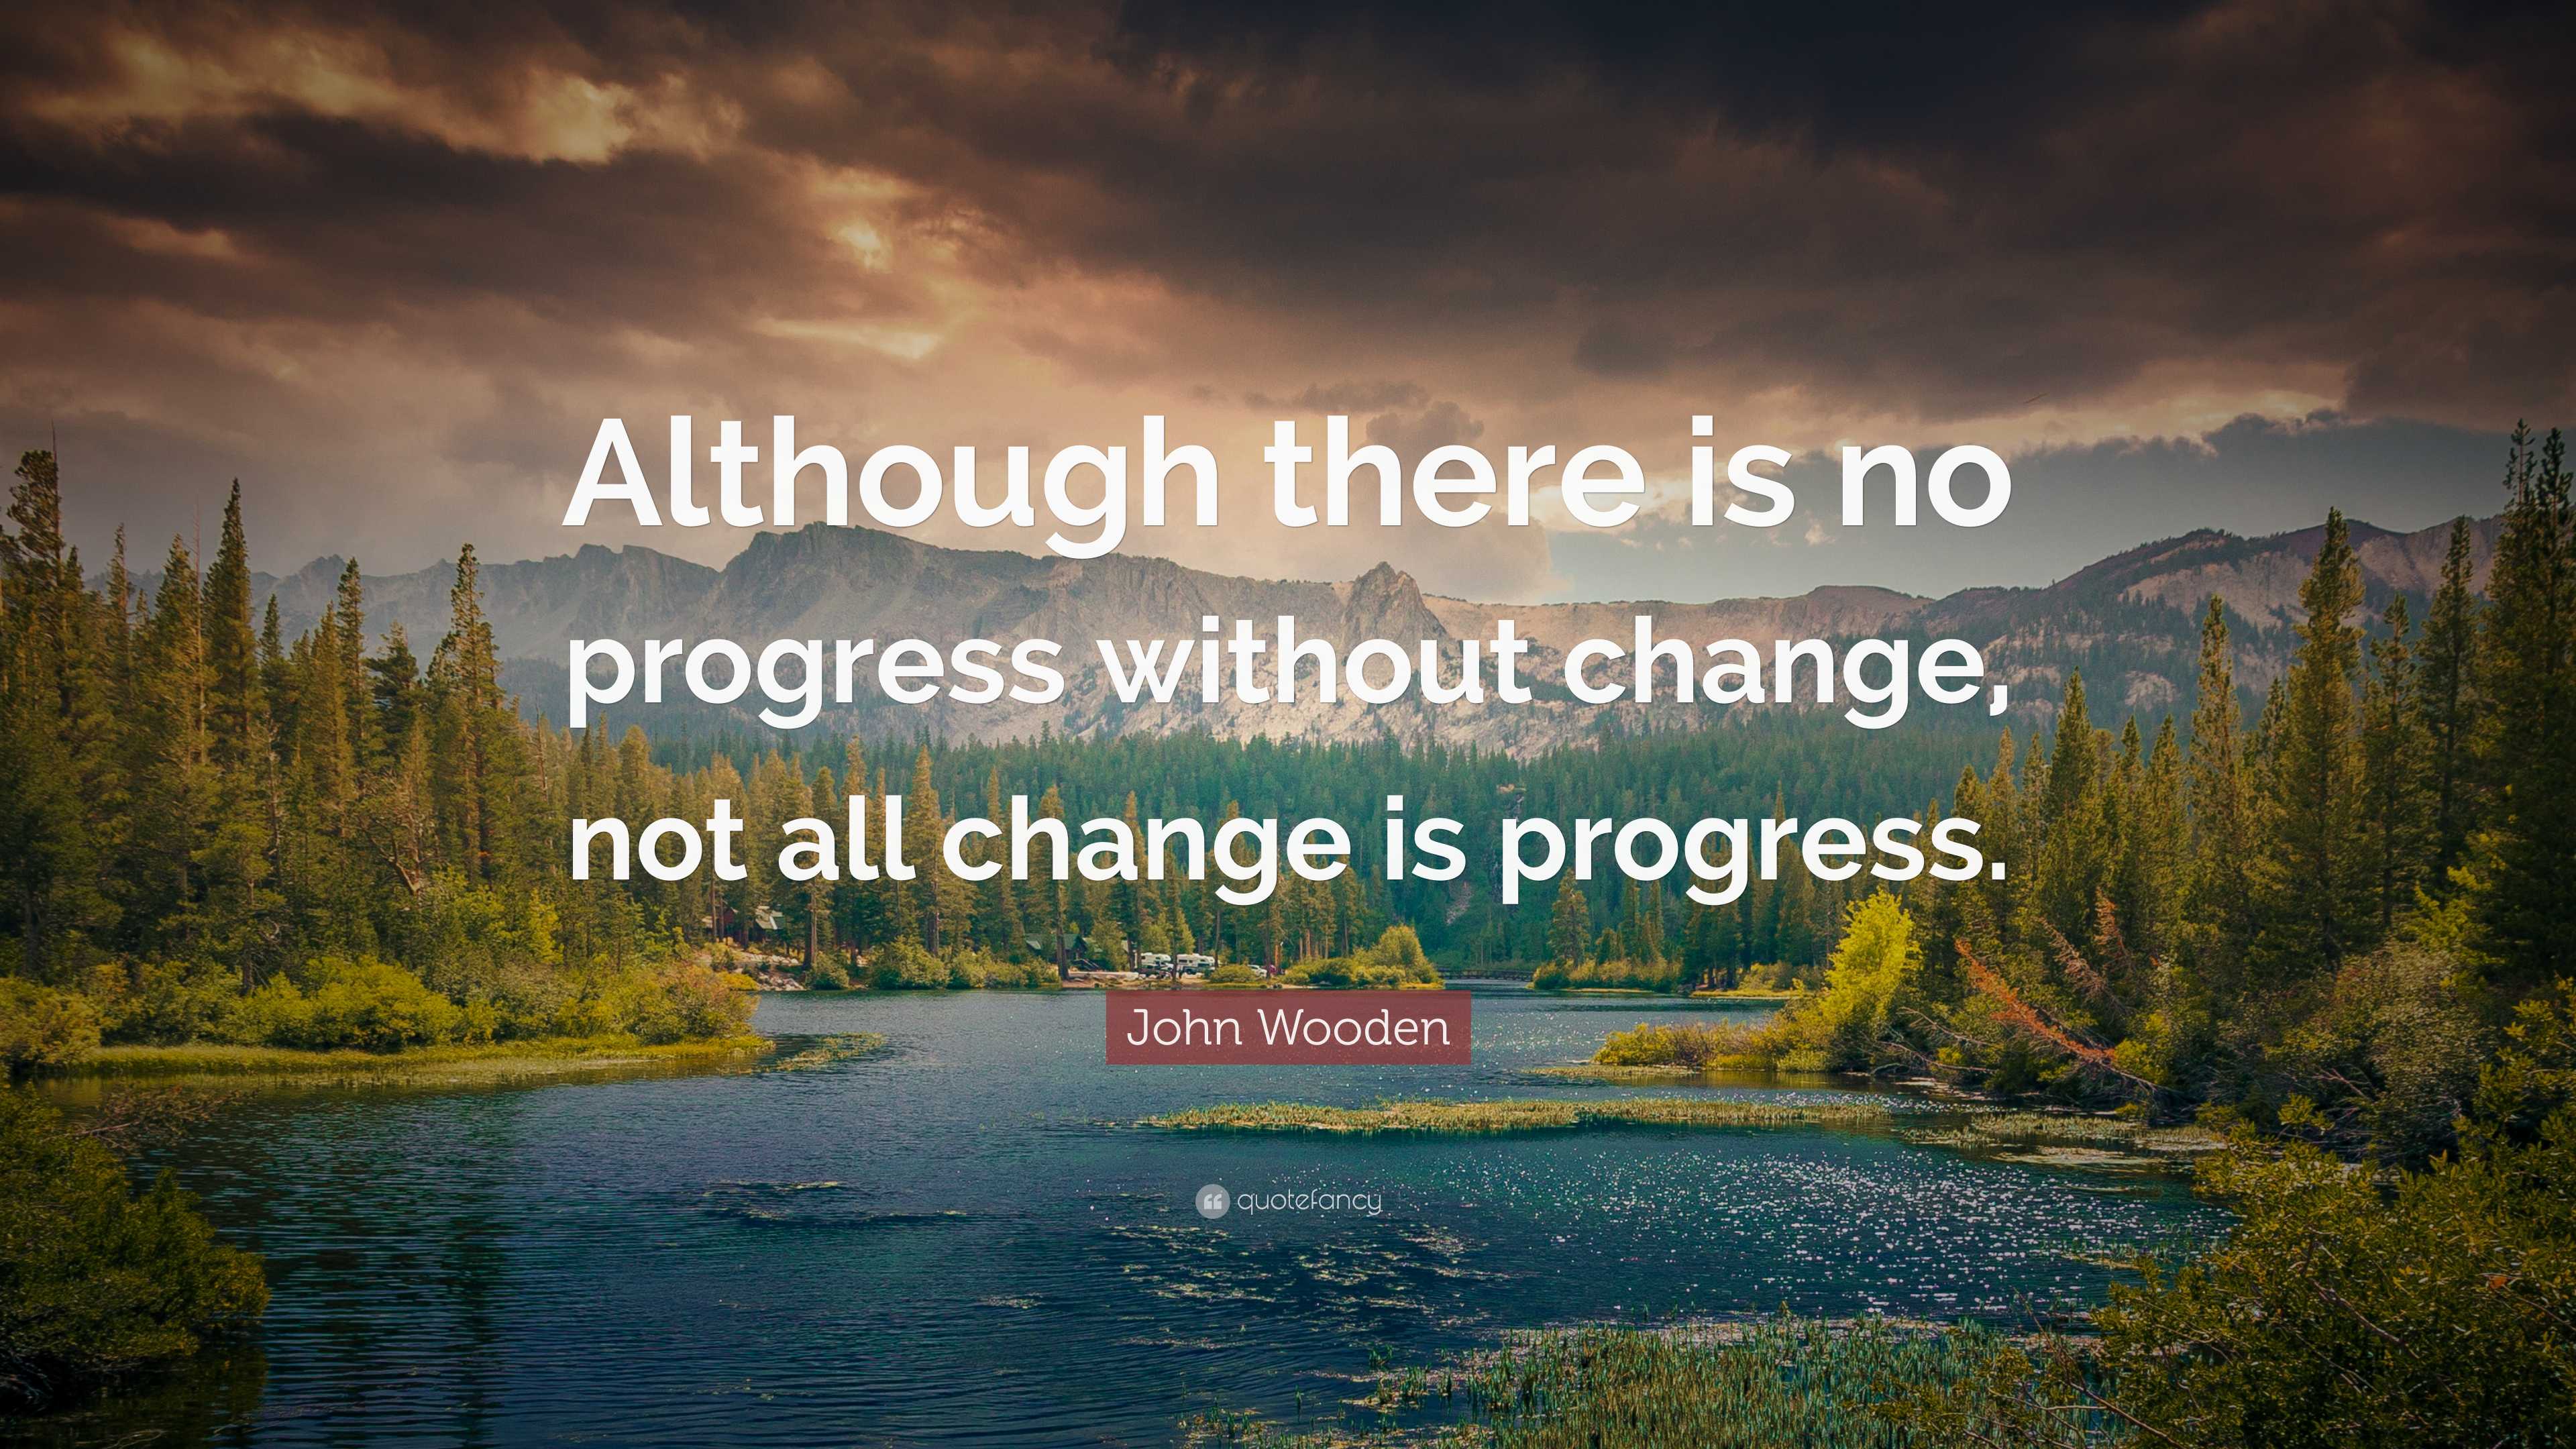 John Wooden Quote: “Although there is no progress without change, not ...